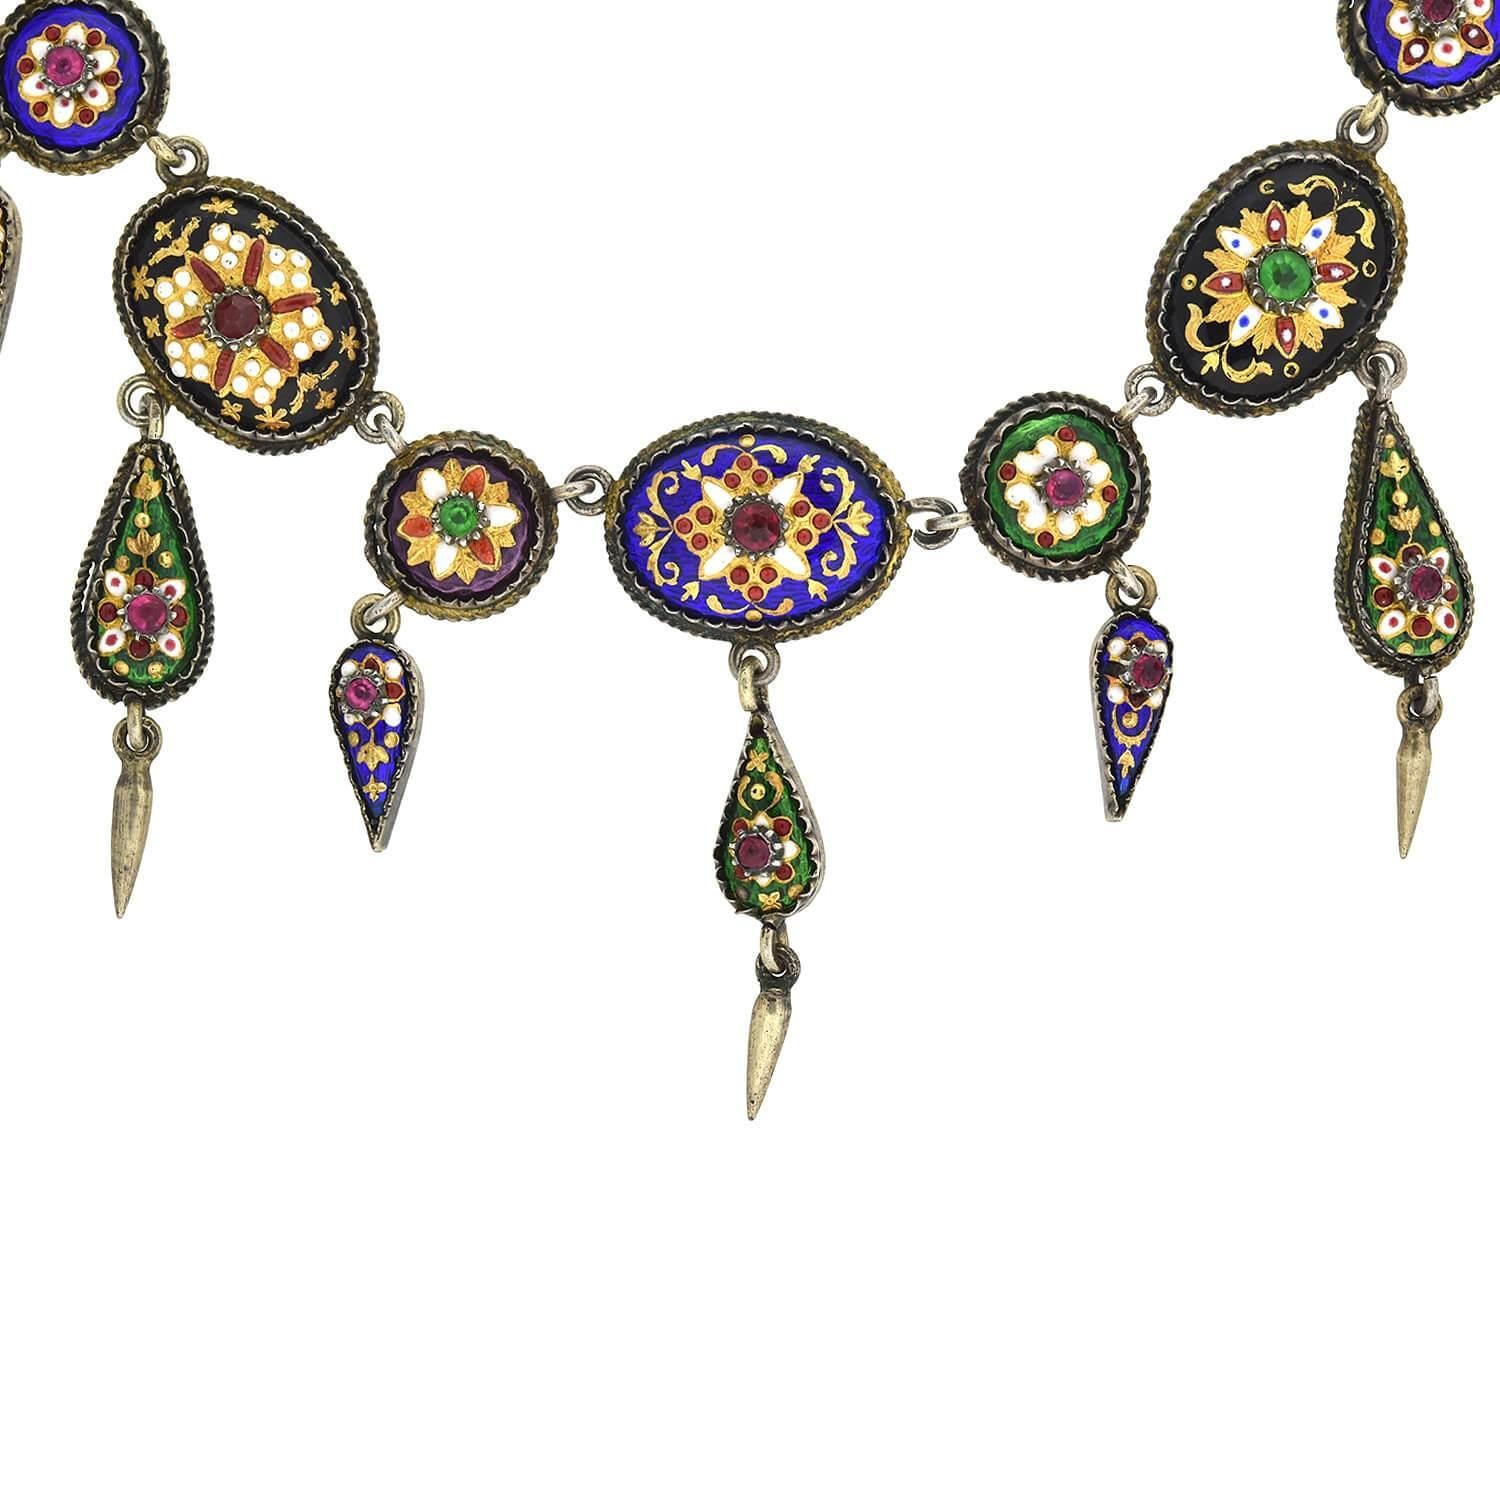 An absolutely stunning French Bresse Bressan enameled necklace from the Victorian (ca1880s) era! Crafted in sterling silver, this wonderful piece features incredibly vibrant enameled designs paired with French paste stones. Twenty seven round and